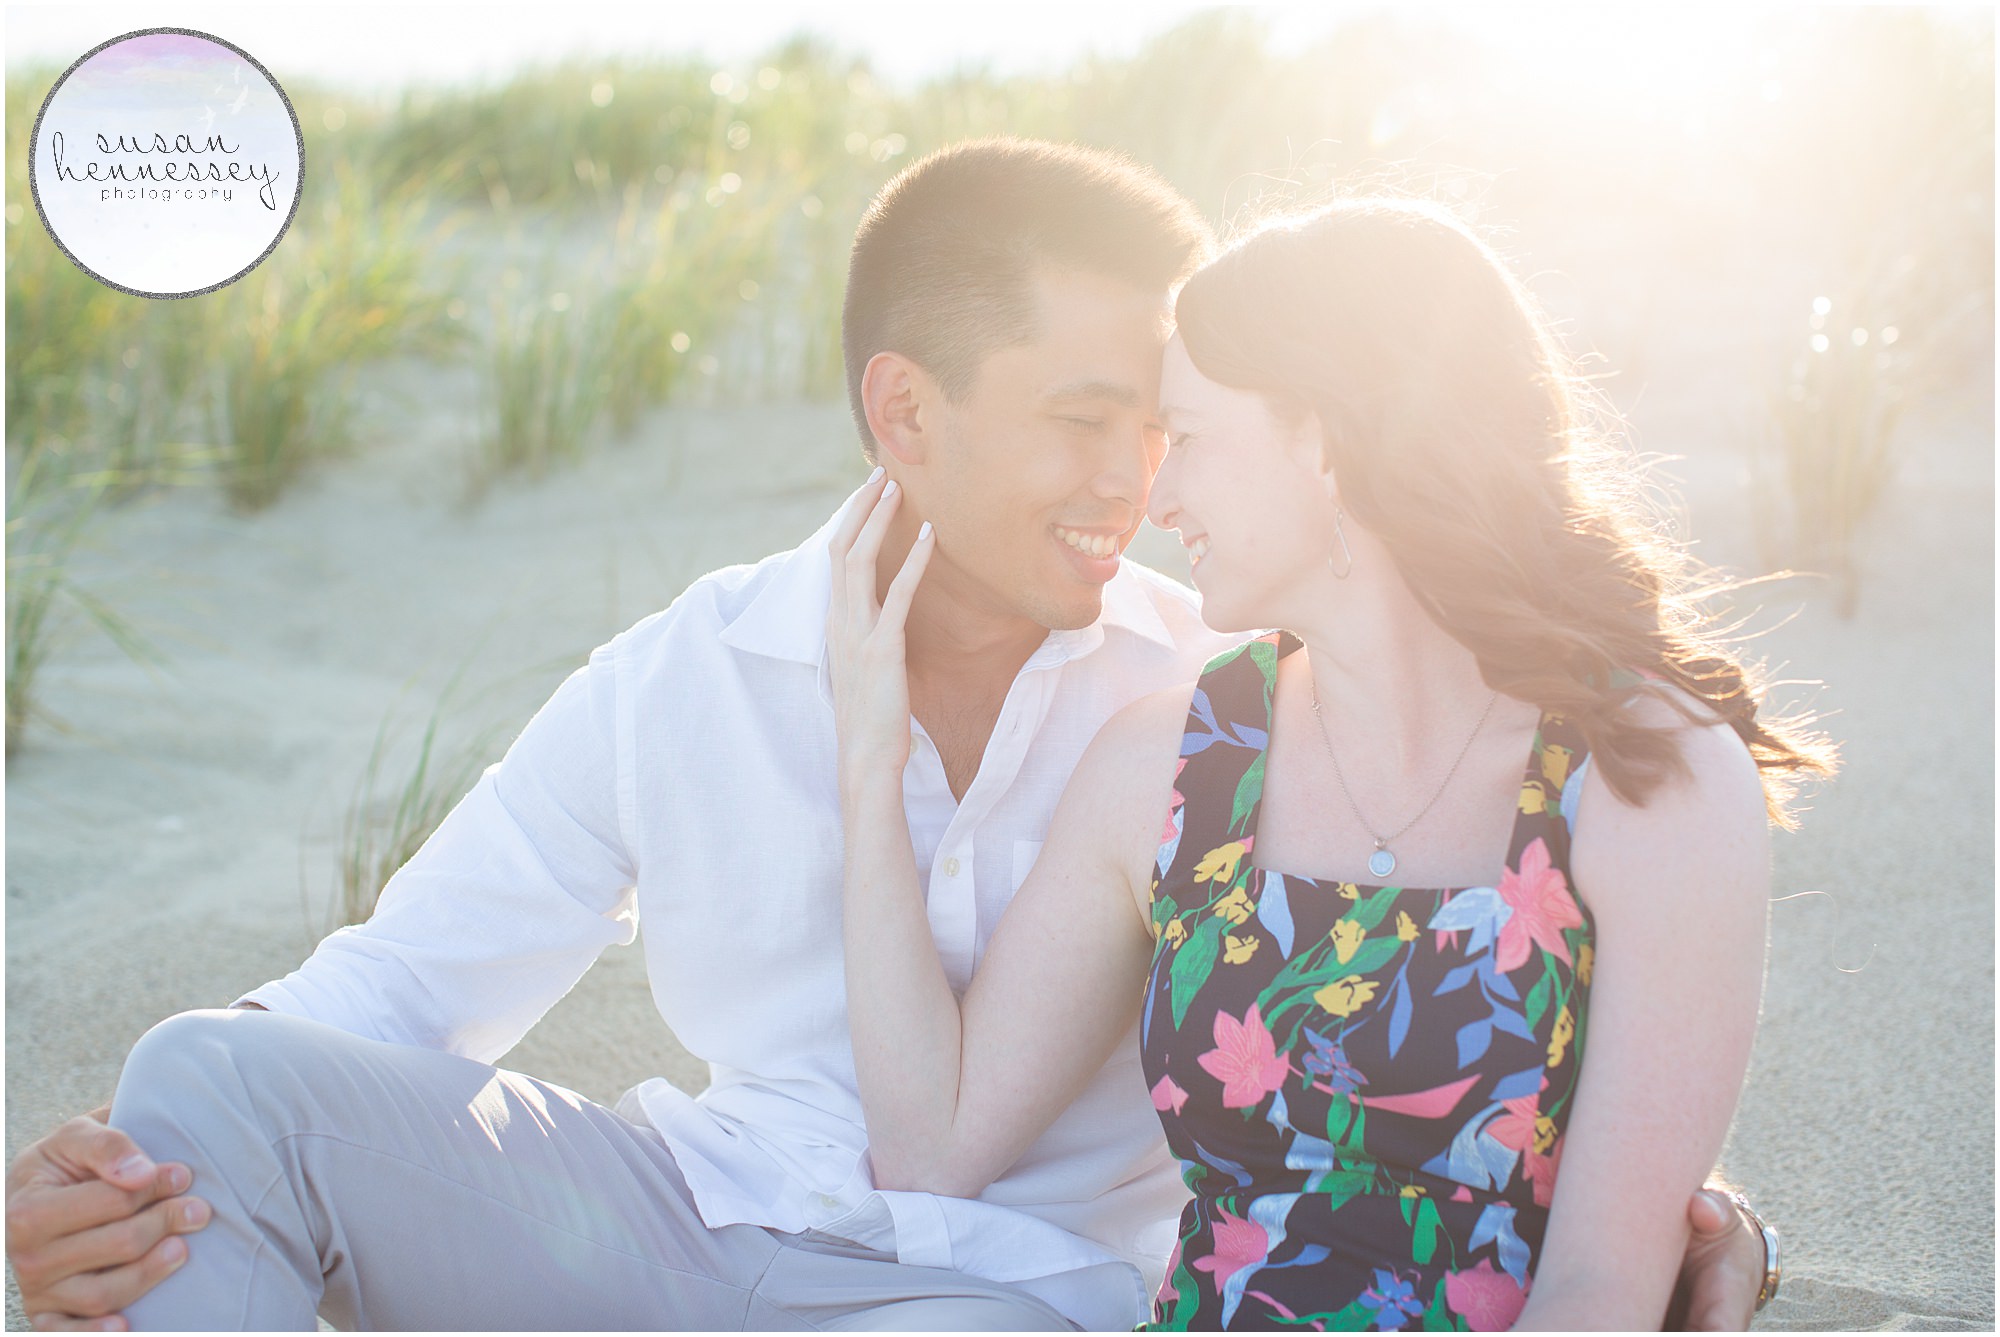 Romantic images from a Bradley Beach Engagement Session